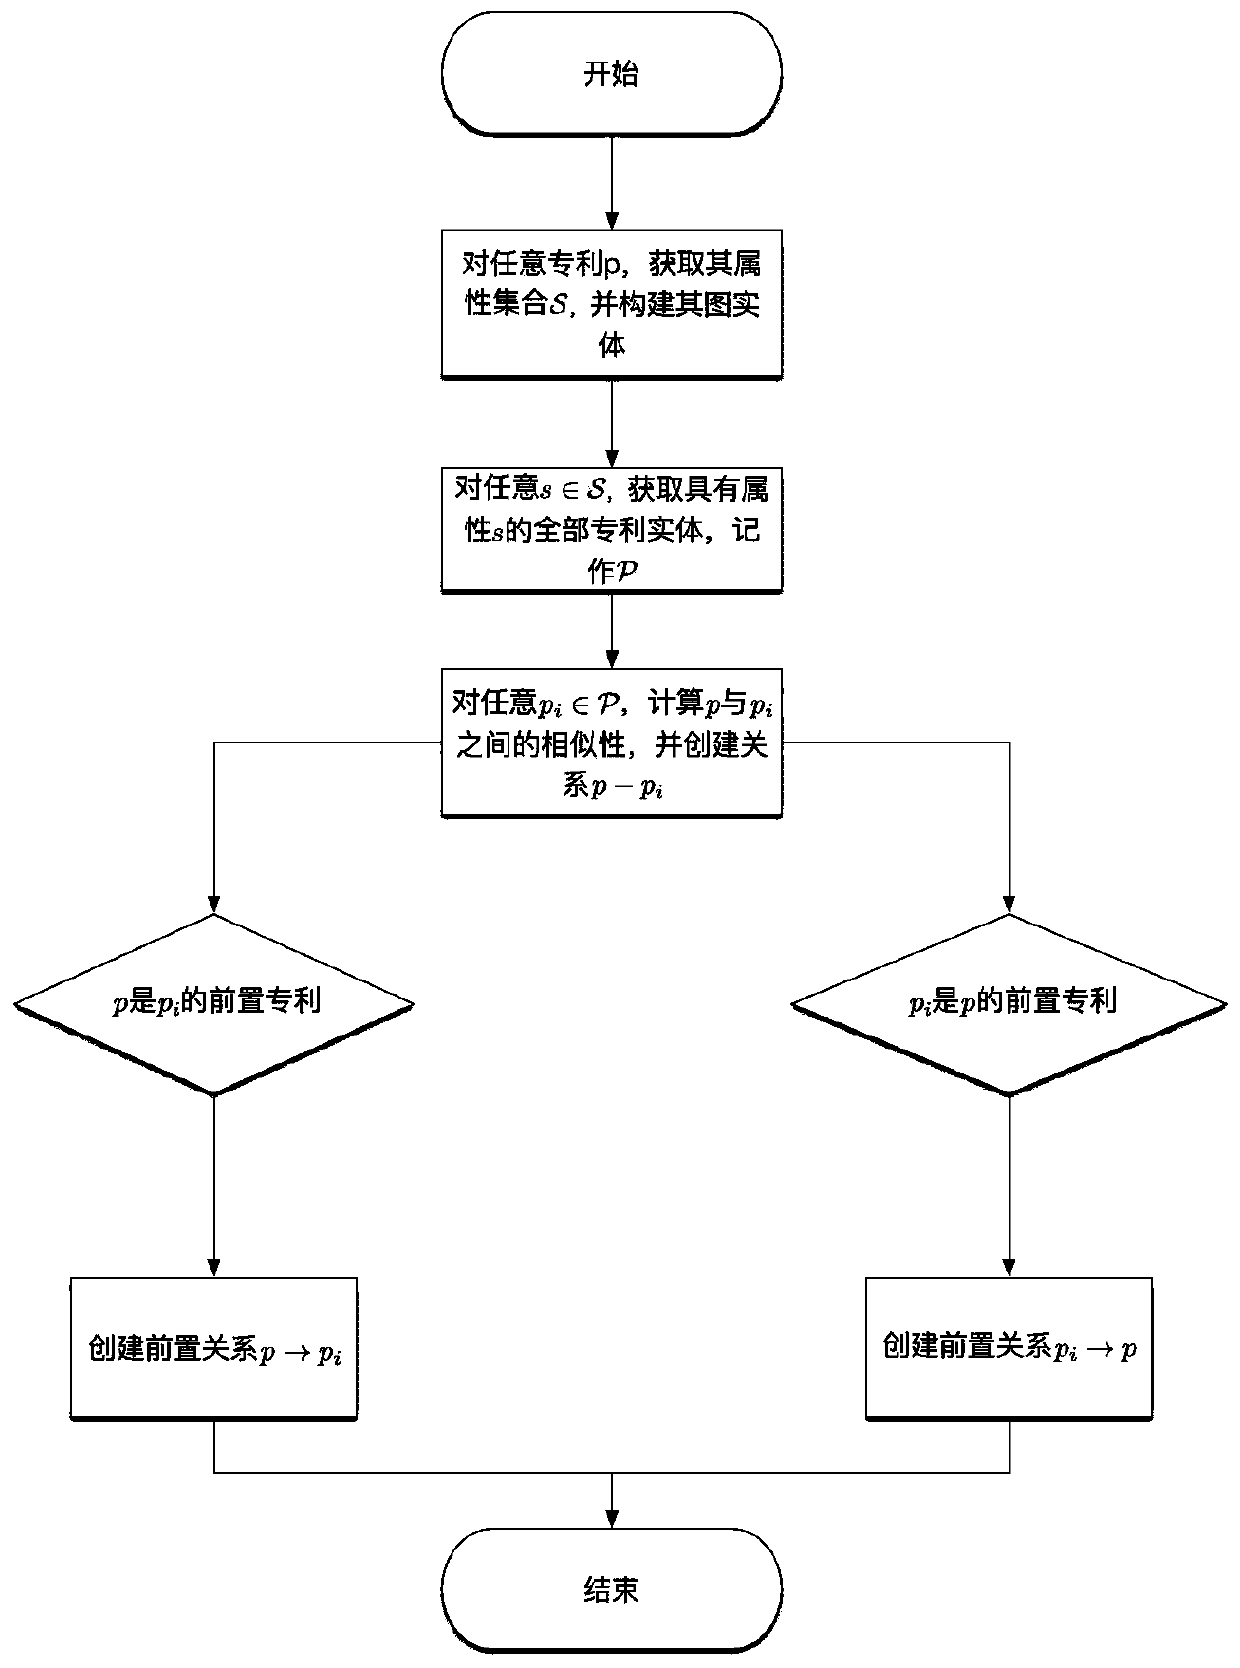 Intelligent patent retrieval method and system based on knowledge graph